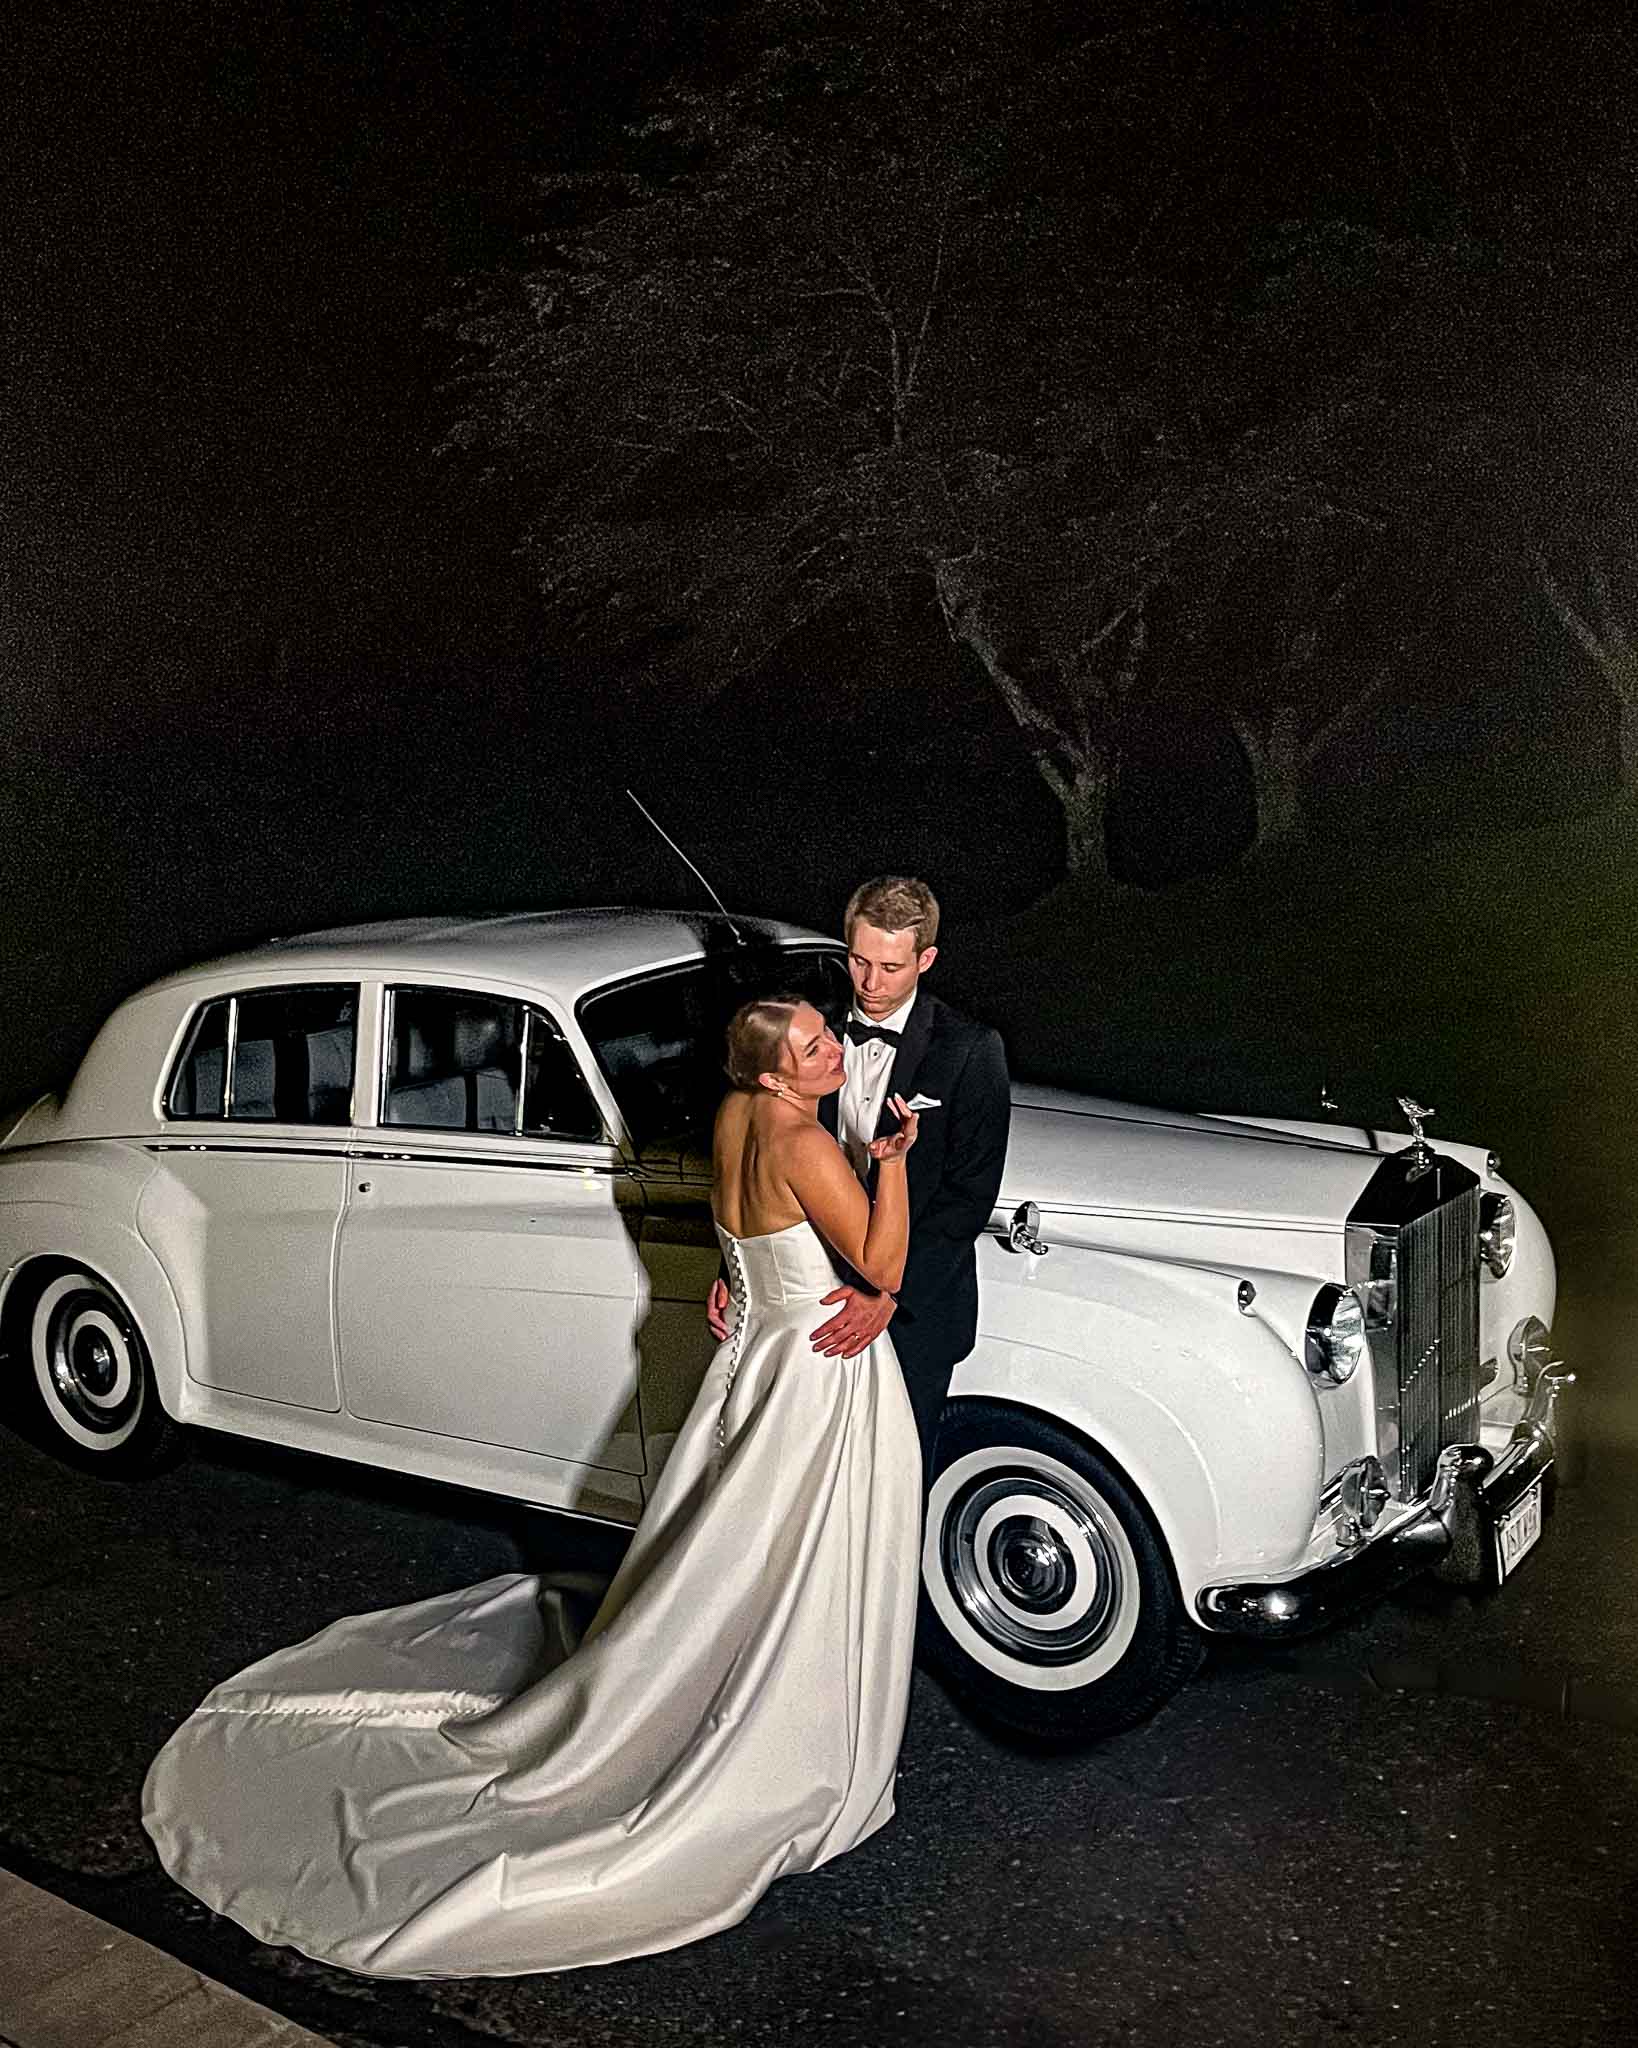 Photo of bride-groom standing next to our white 1956 Rolls Royce during an evening celebration.